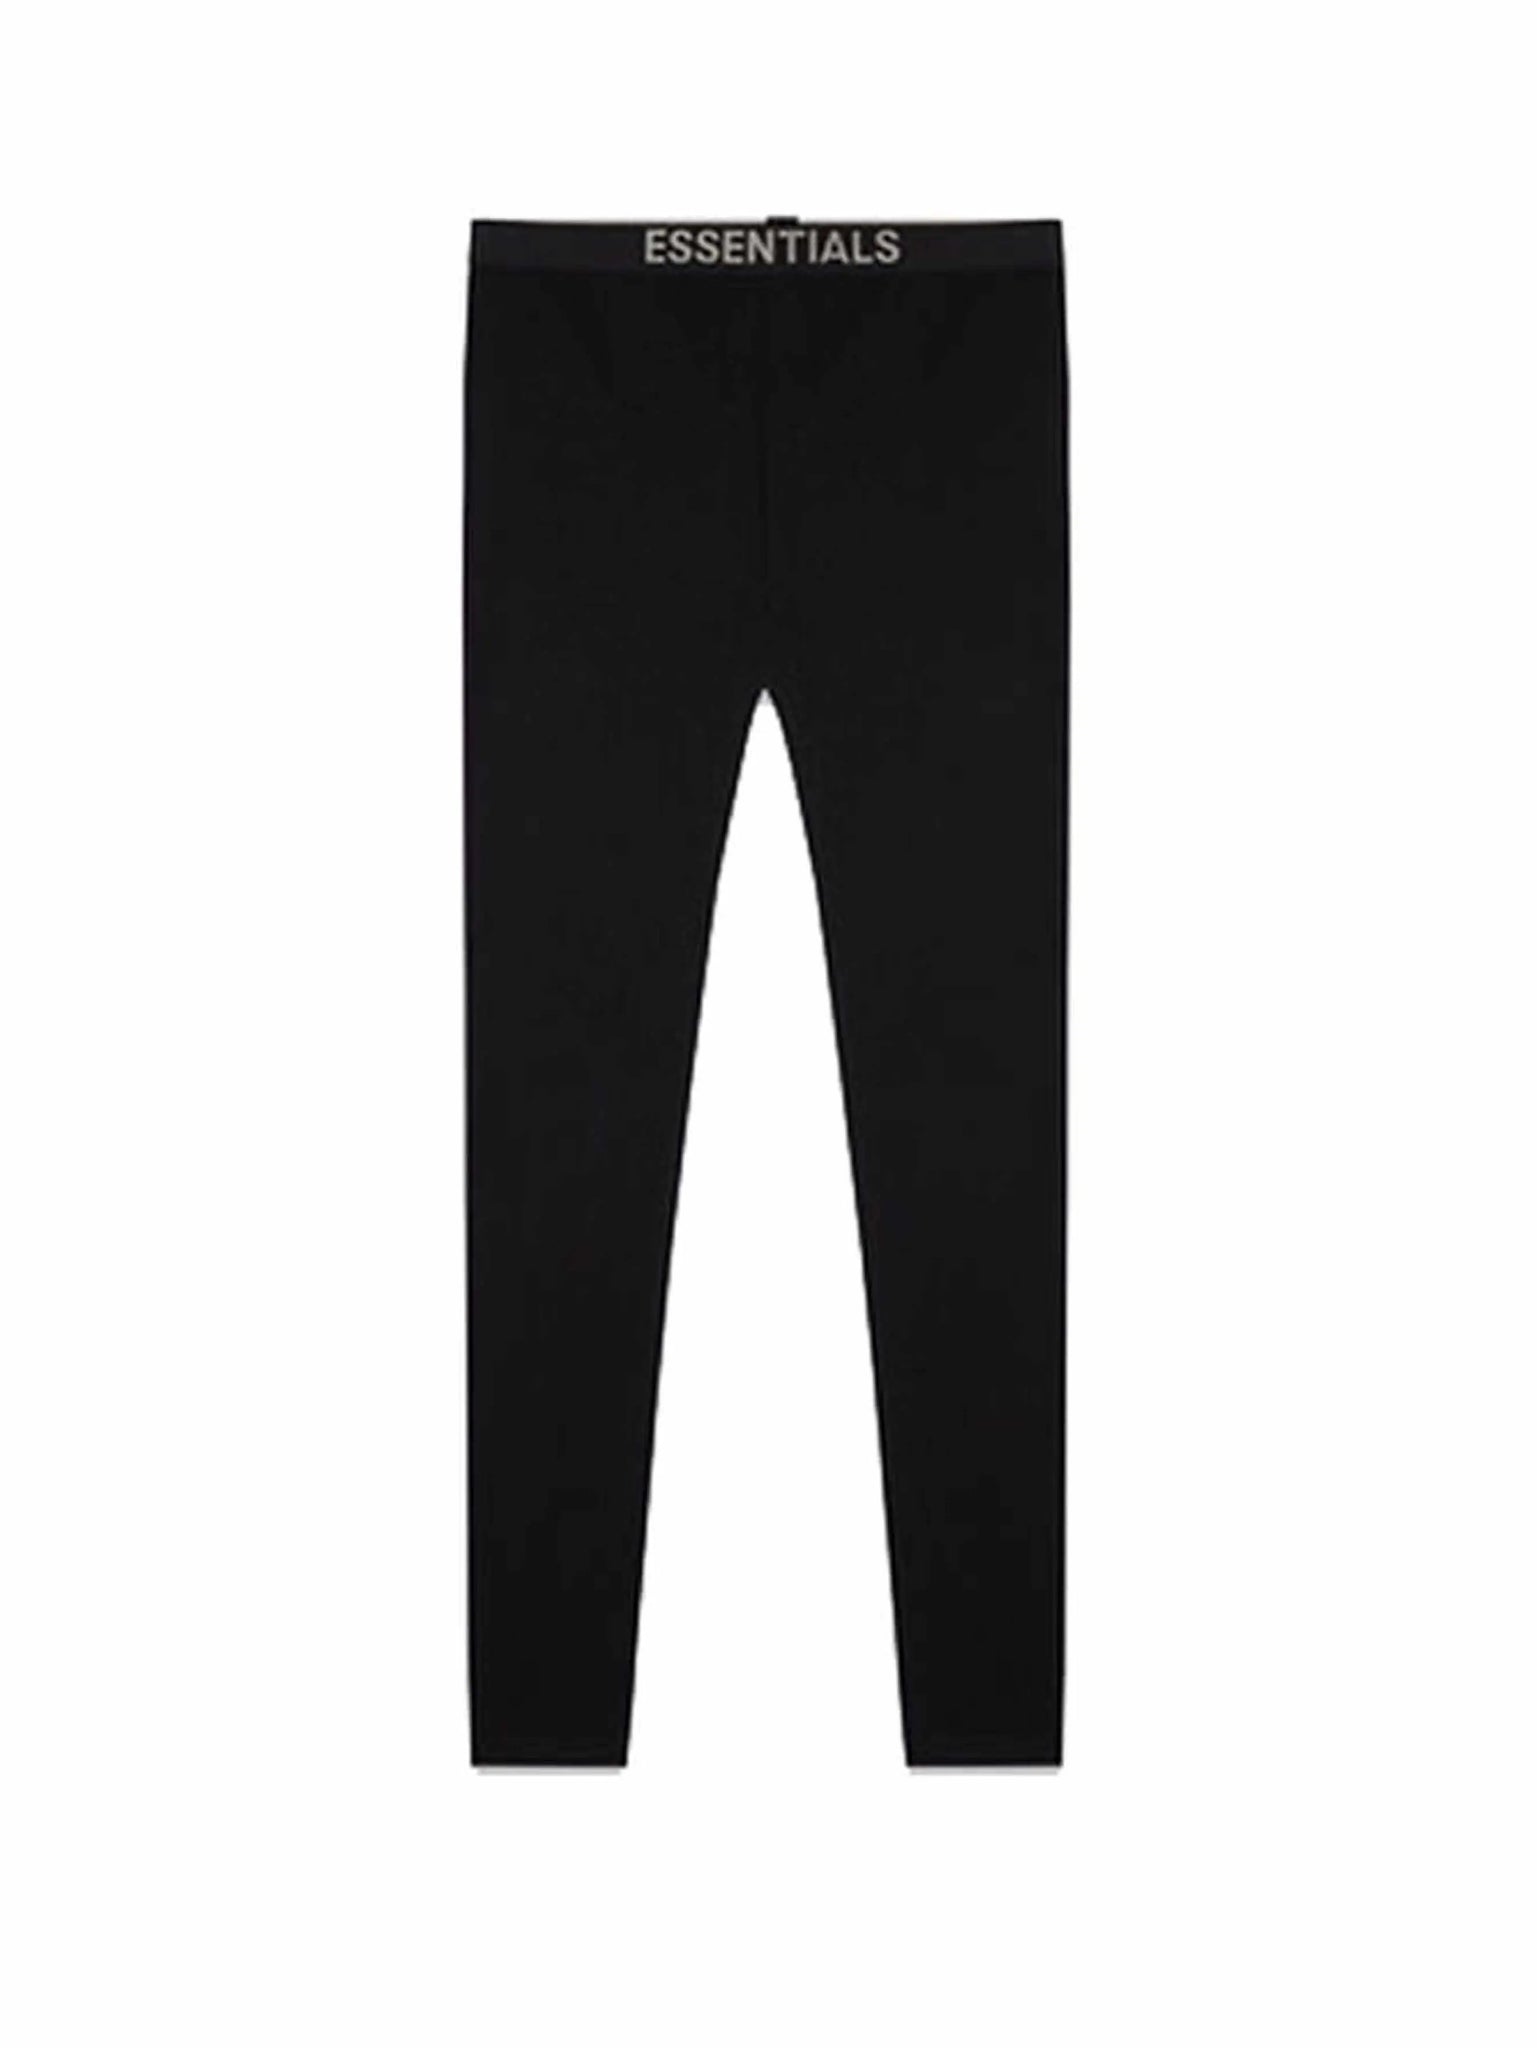 Fear of God Essentials Lounge Pants Dark Slate/Stretch Limo/Black in Auckland, New Zealand - Shop name